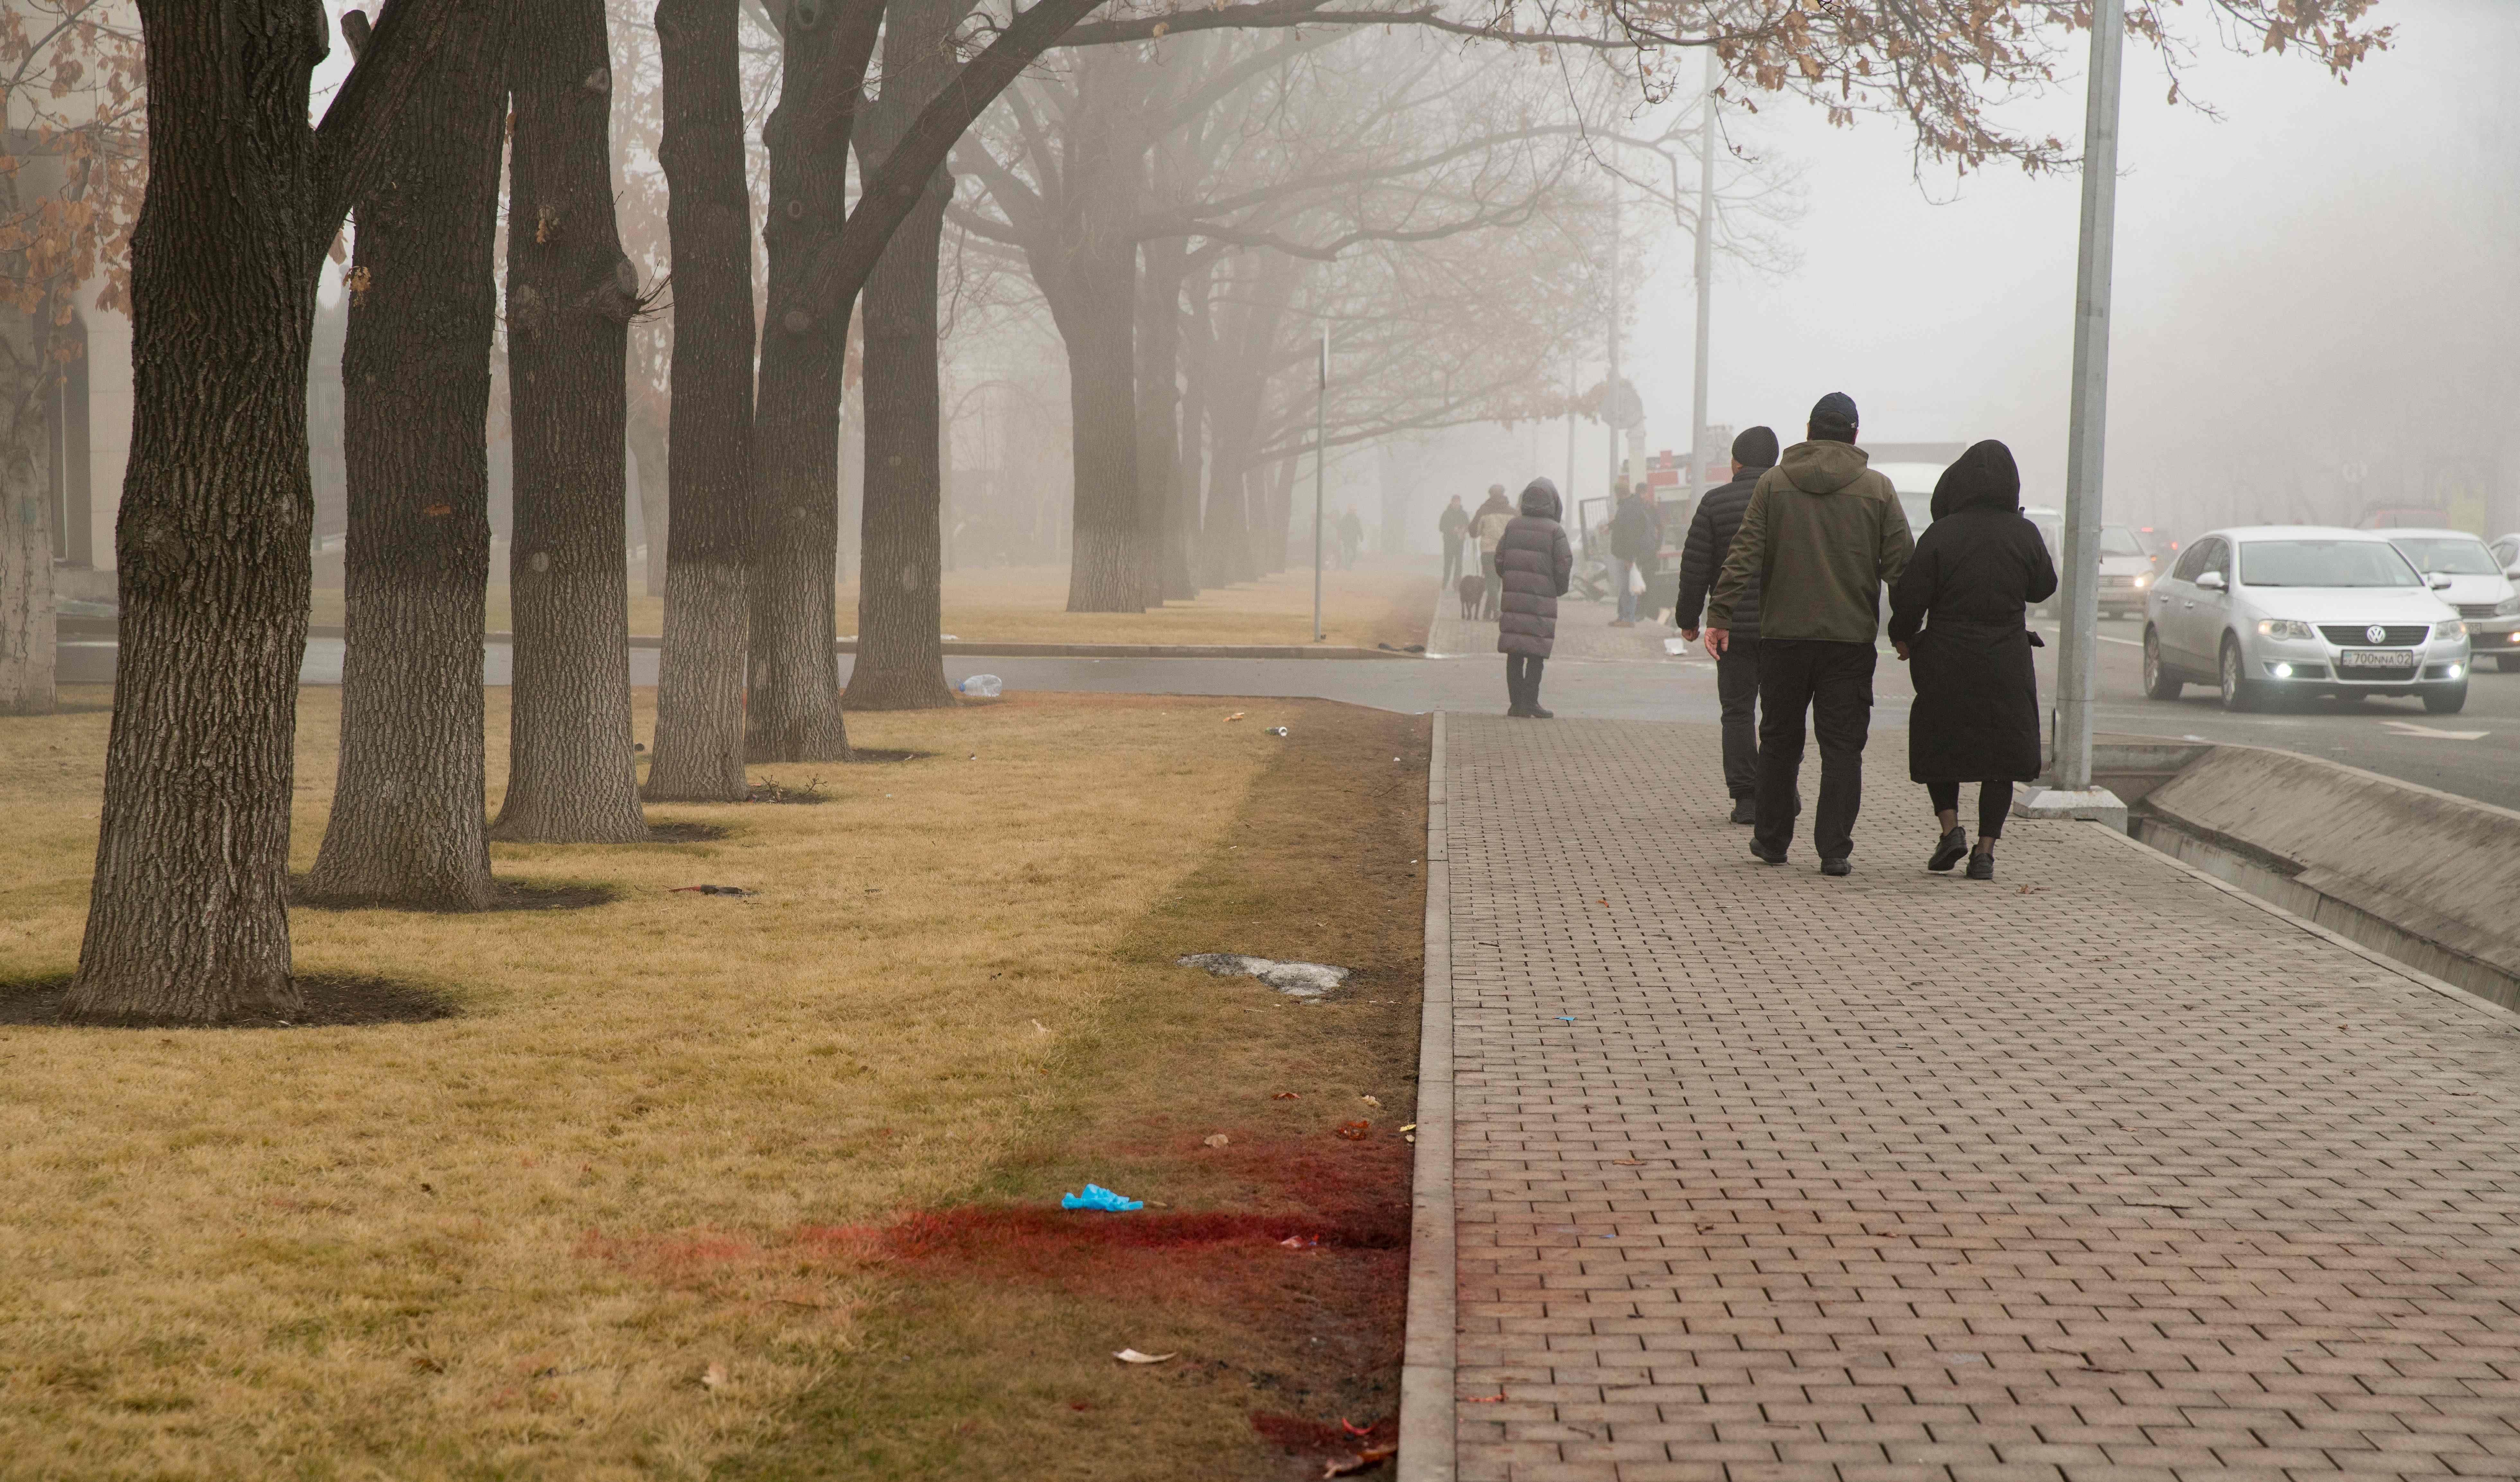 People walk past blood in Almaty on Thursday following violent protests. Photo: ALEXANDER BOGDANOV/AFP via Getty Images